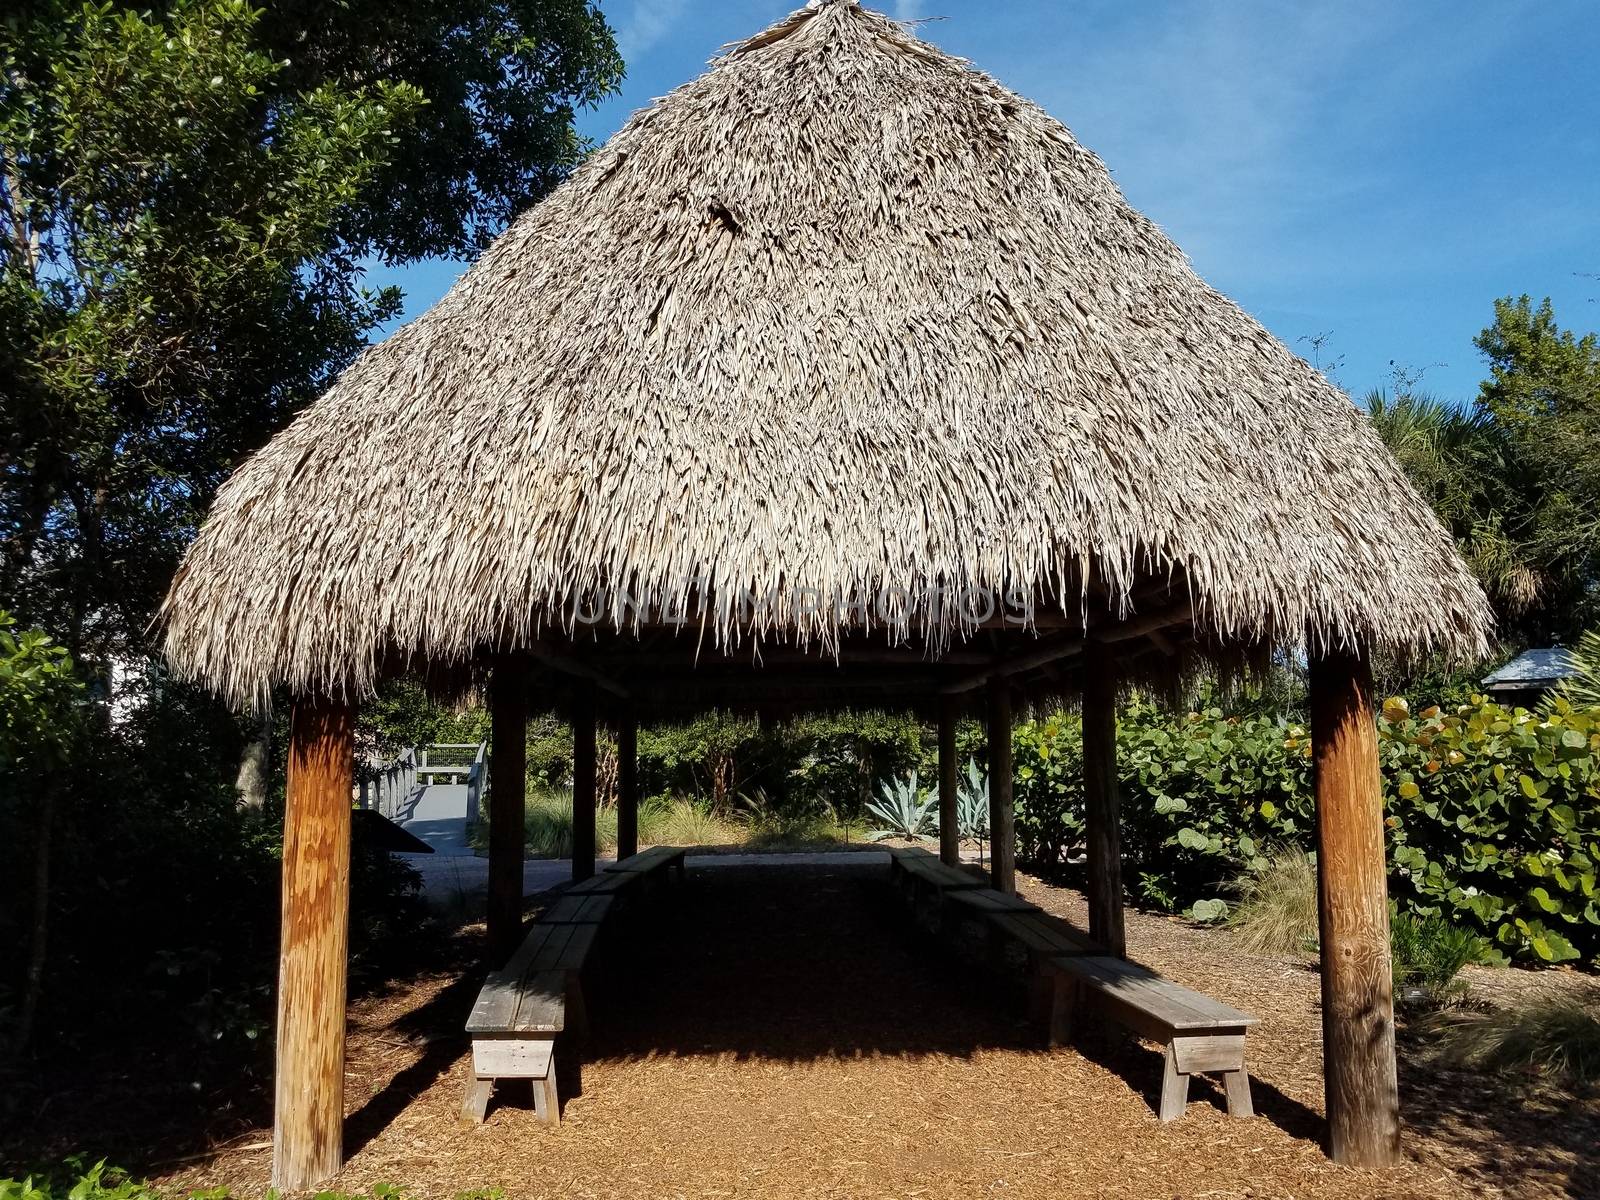 structure or building with grass or thatch roof and wood benches